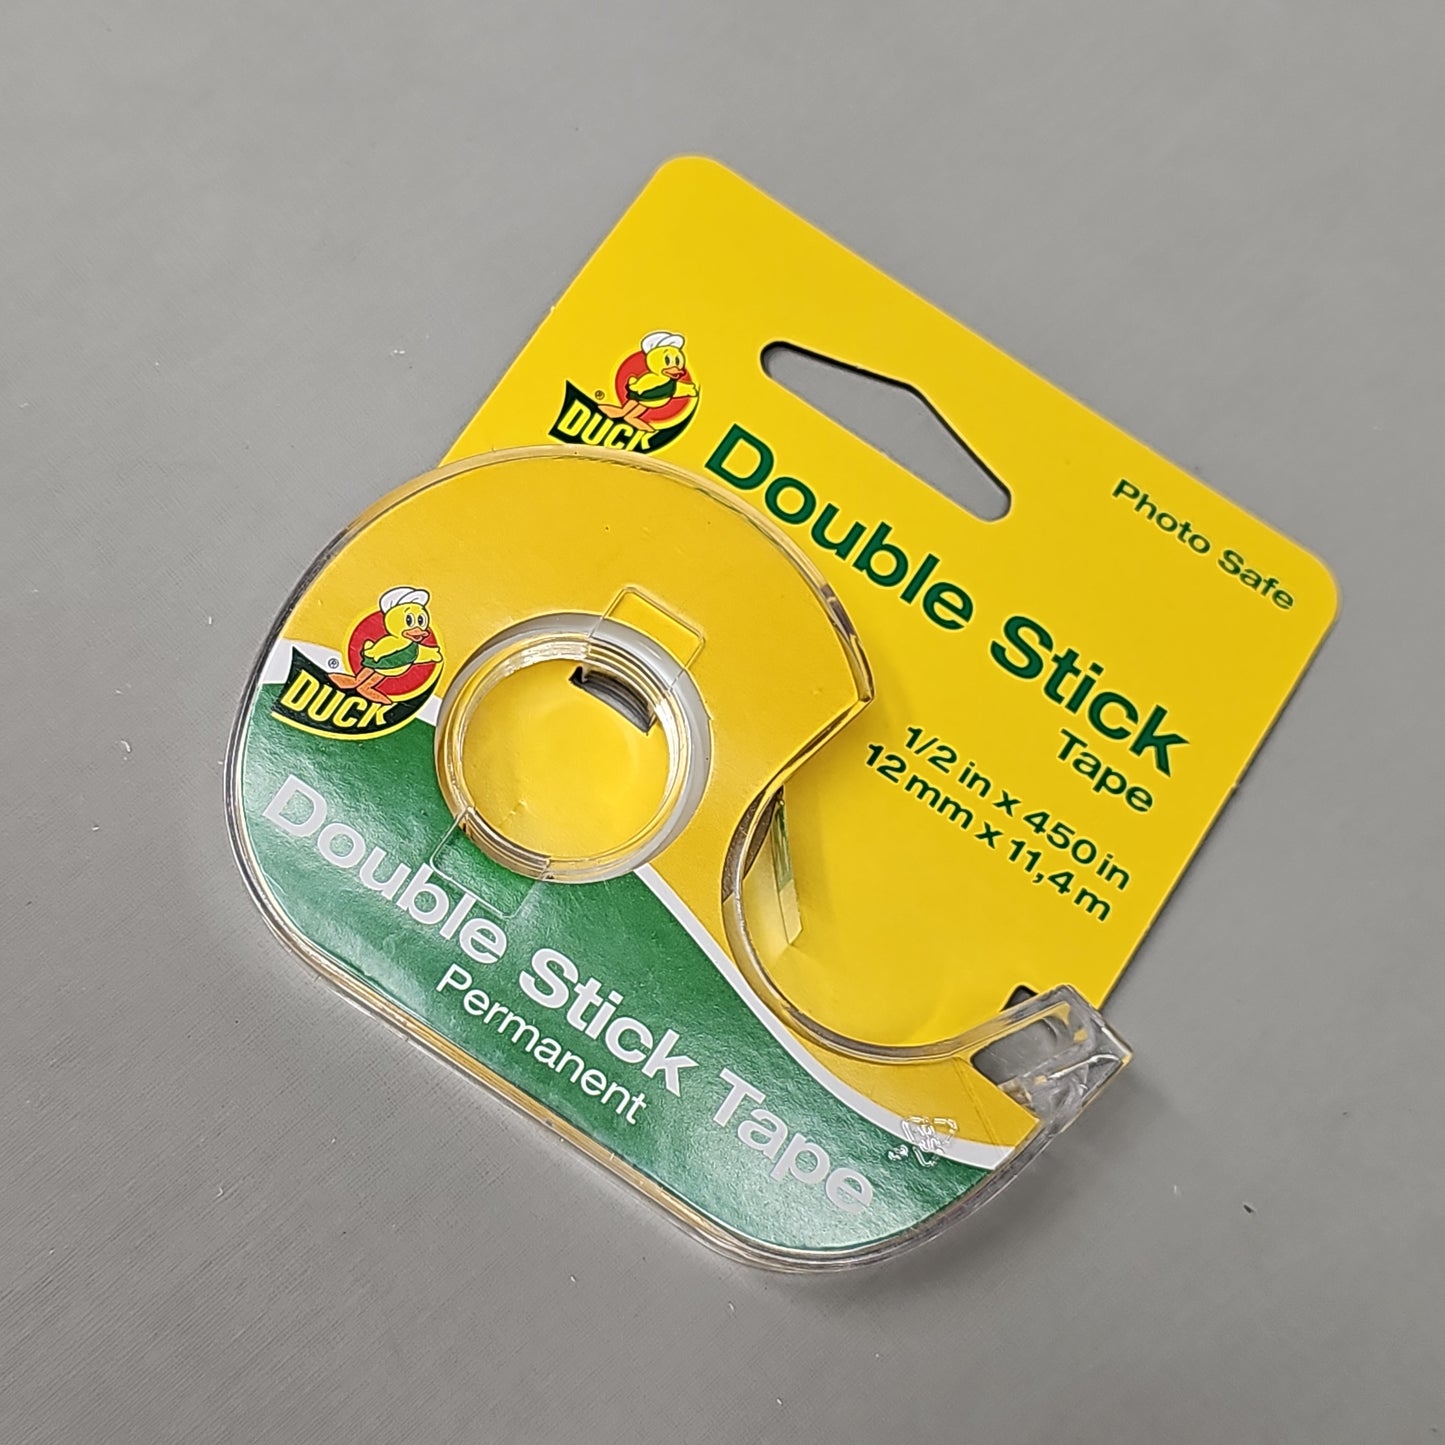 SHURTAPE DUCK Pack of 15 Double Stick Permanent Photo Safe Tape 1/2" x 450" (New)